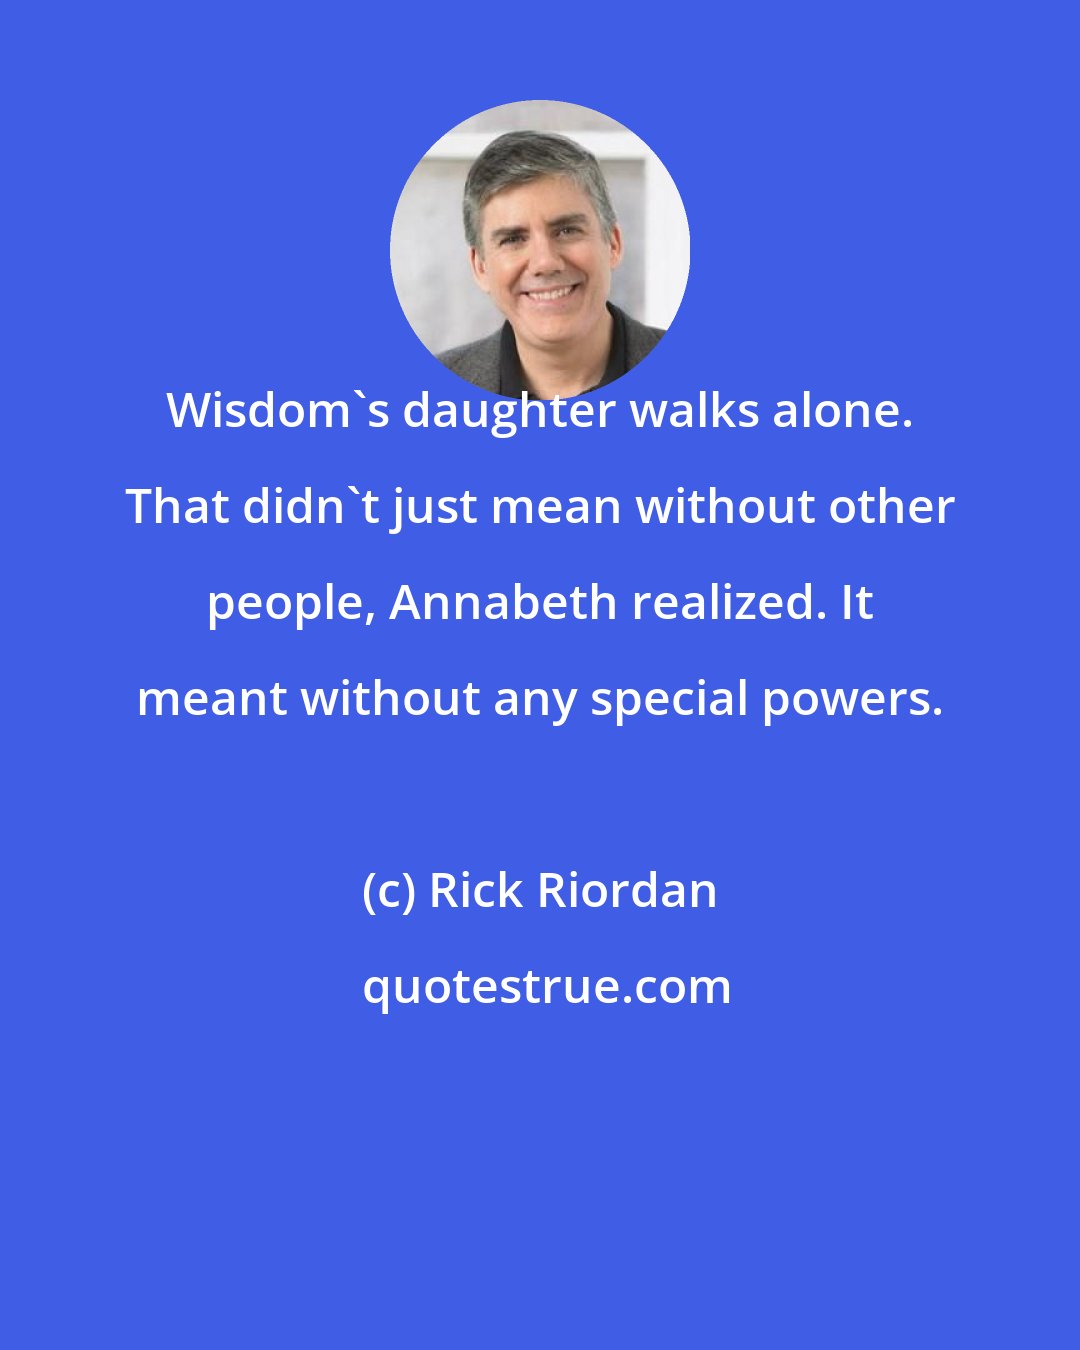 Rick Riordan: Wisdom's daughter walks alone. That didn't just mean without other people, Annabeth realized. It meant without any special powers.